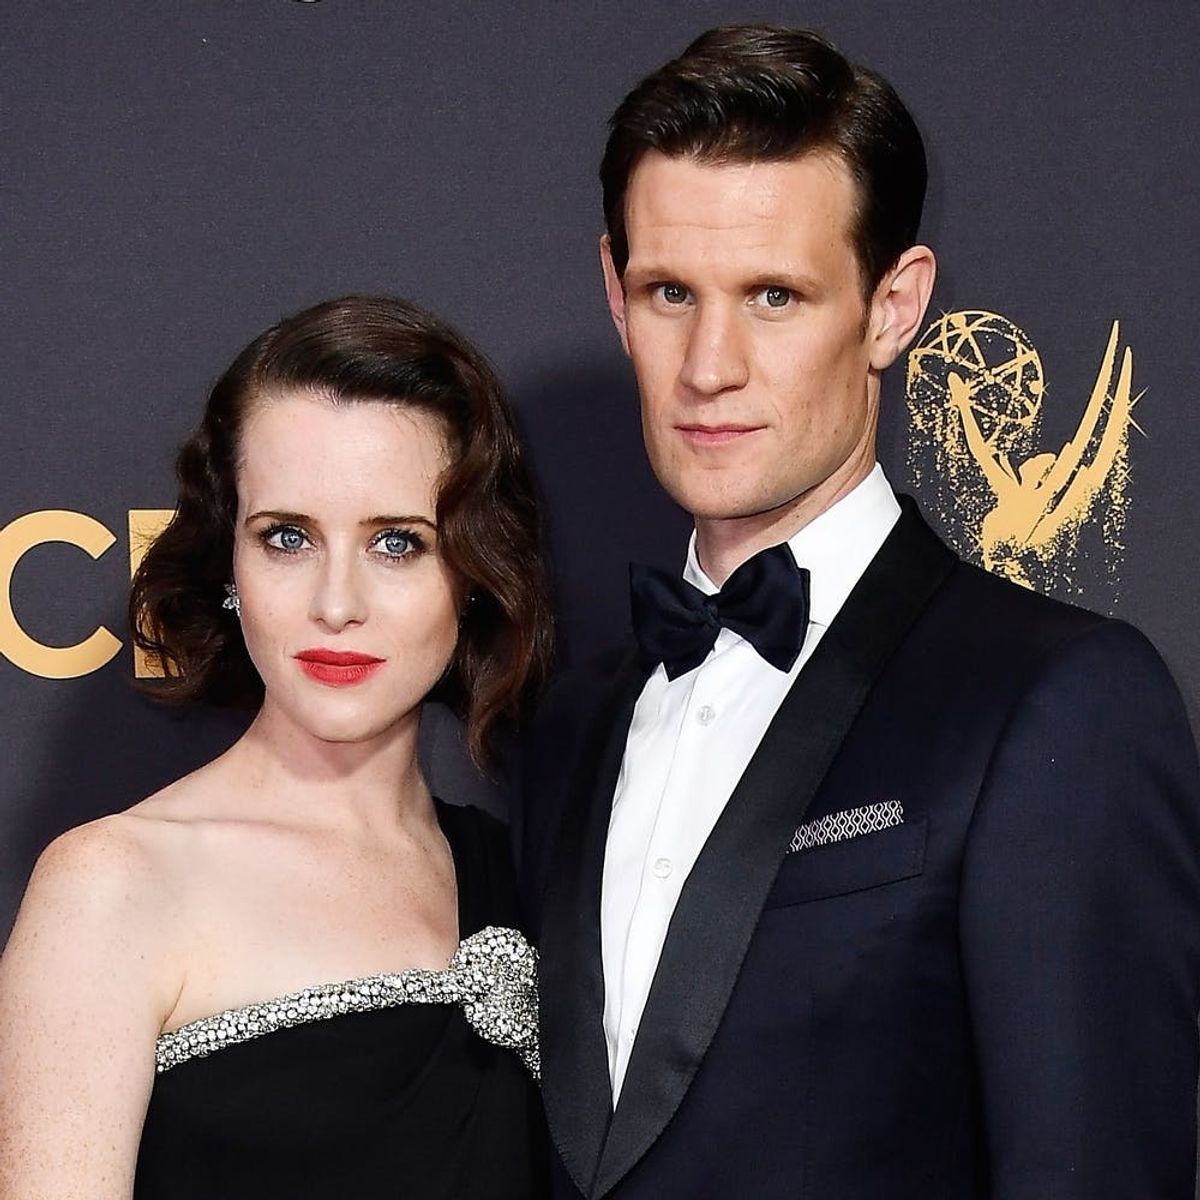 ‘The Crown’ Paid Claire Foy Less Than Matt Smith, Even Though She Played the Queen